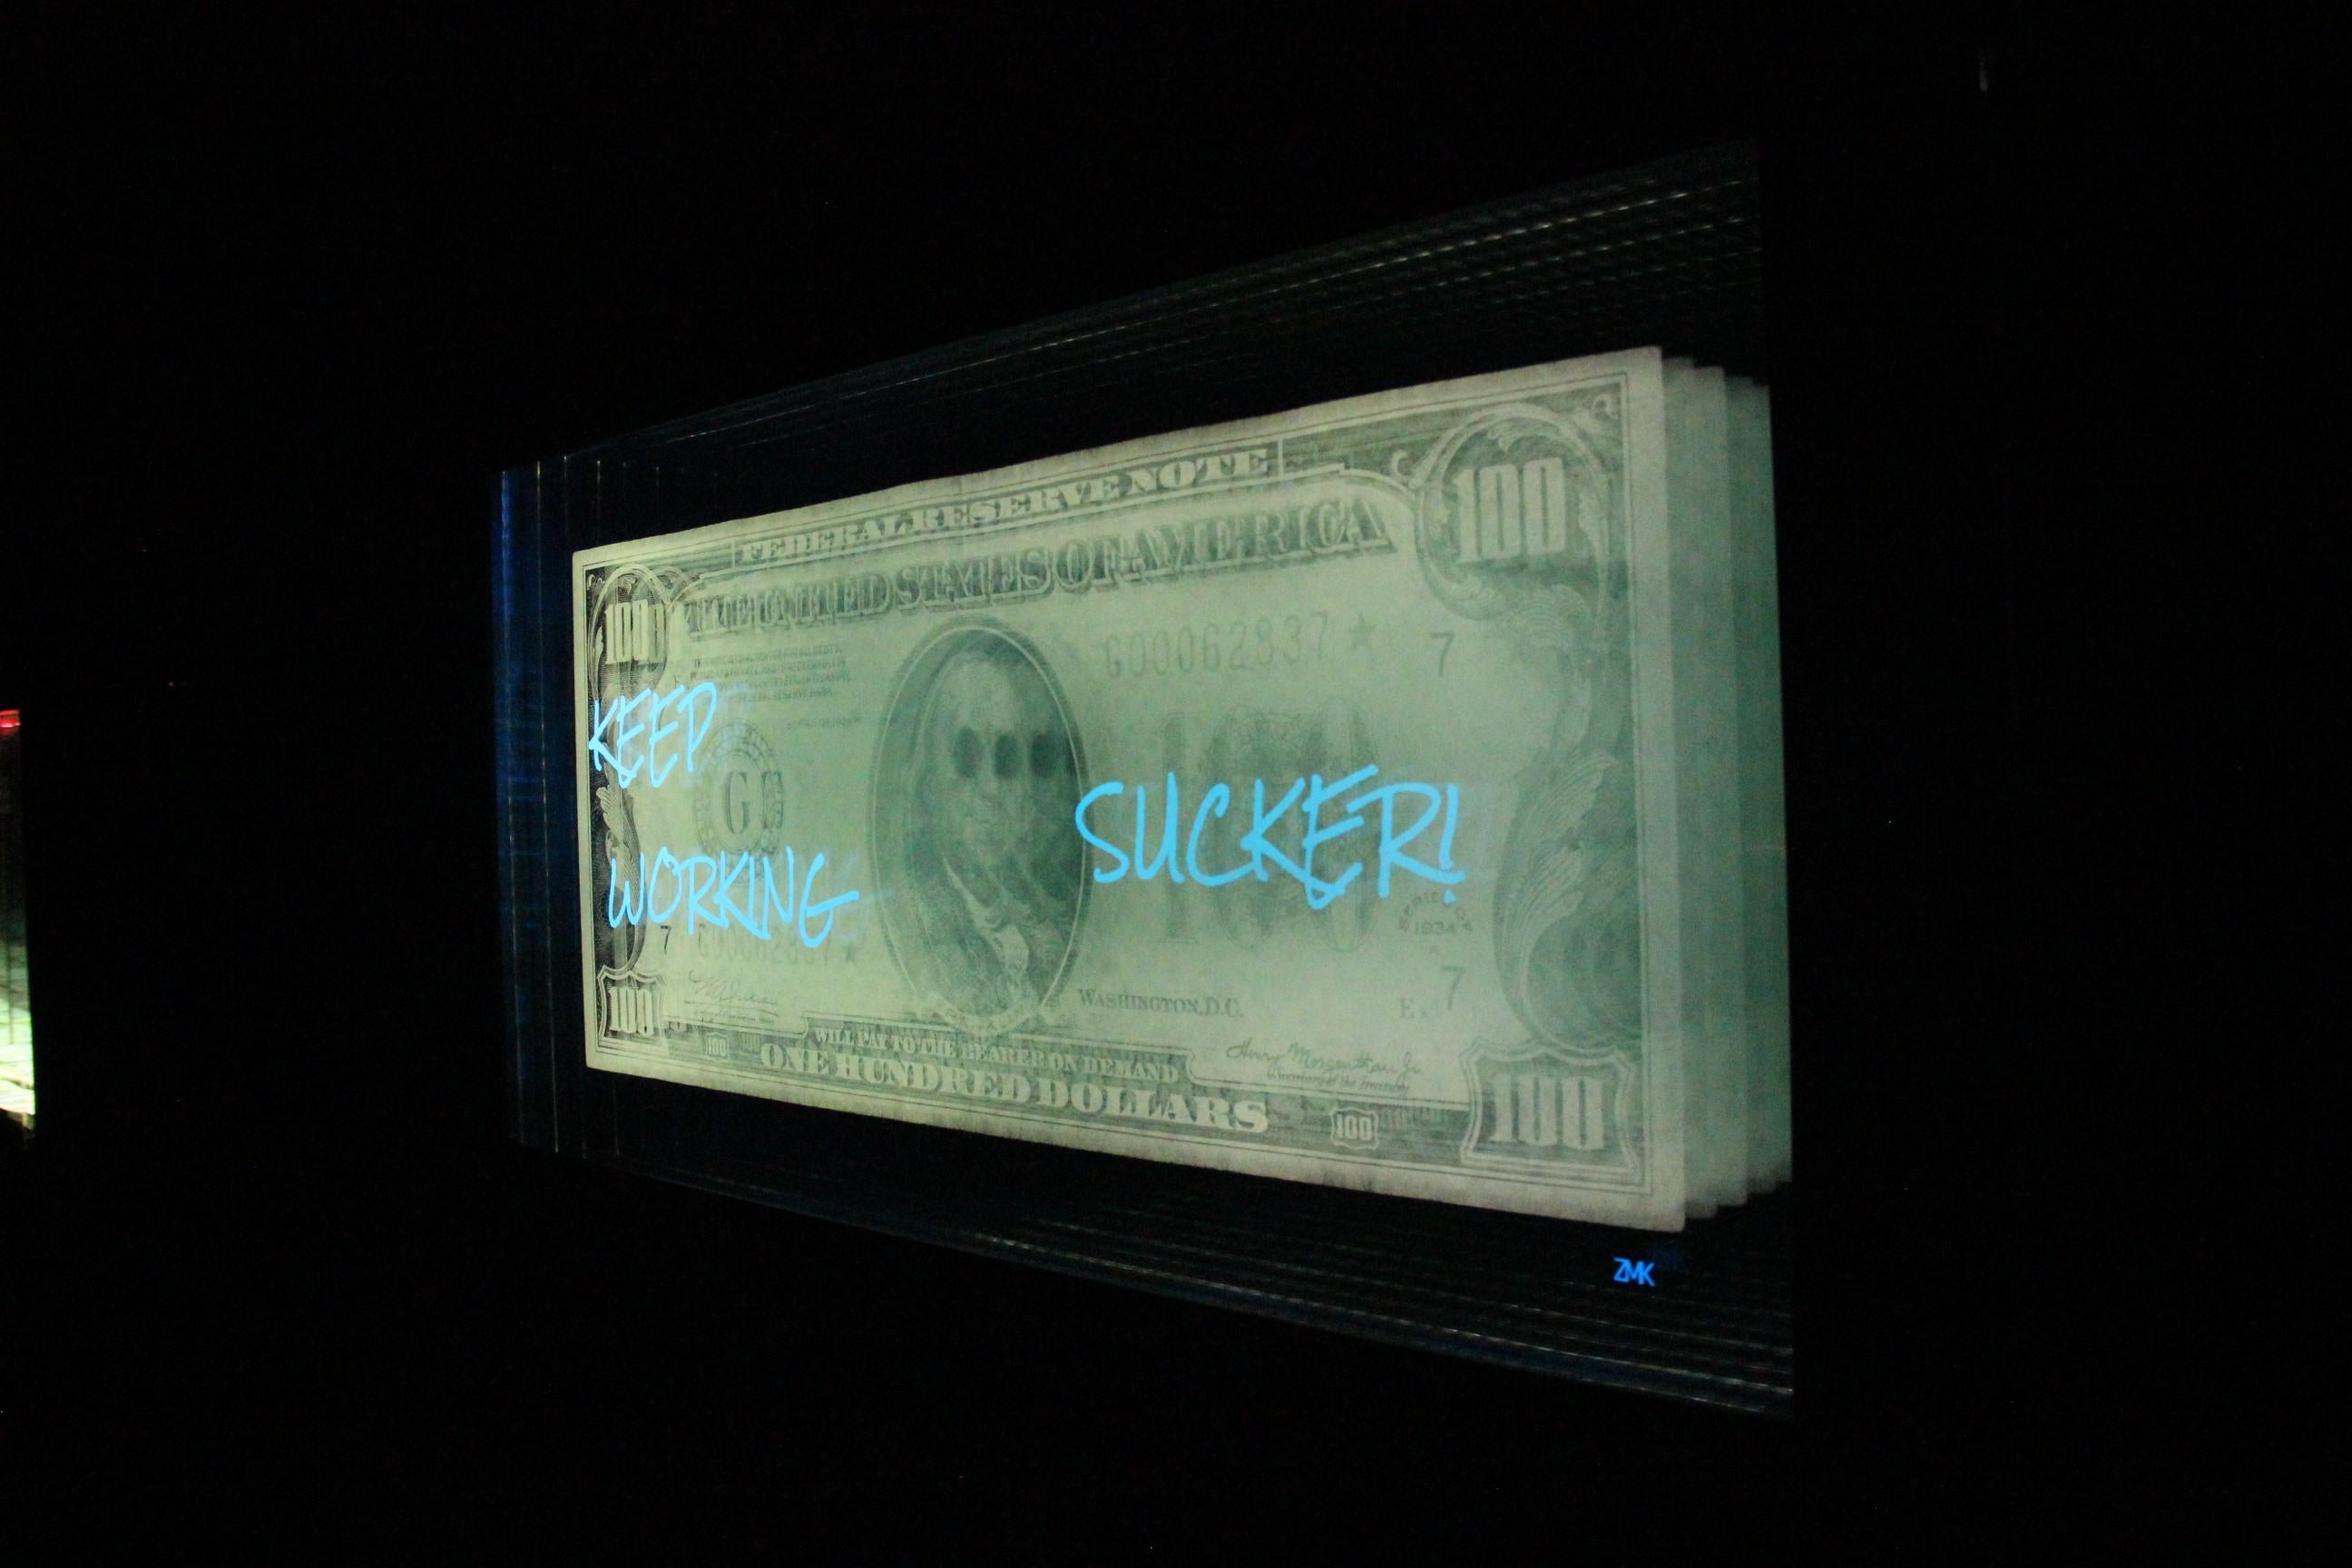 ZMK 
Keep Working Sucker
50 x 27
Etched Glass & LED Lights 
Featured in the ZMK solo exhibition, 